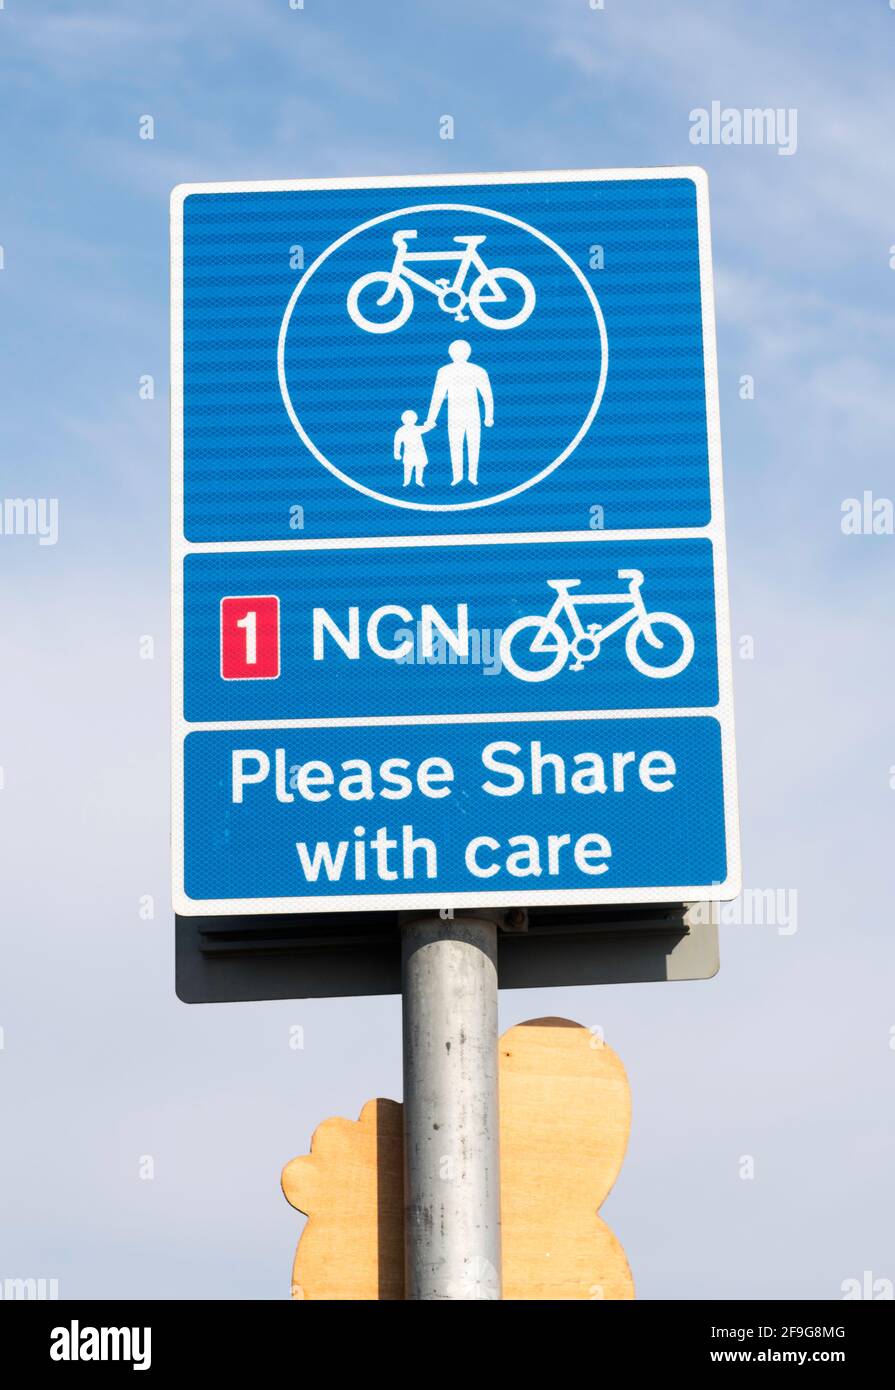 National Cycle Network NCN route 1 sign, Please Share with care, Whitley Bay, north east England, UK Stock Photo